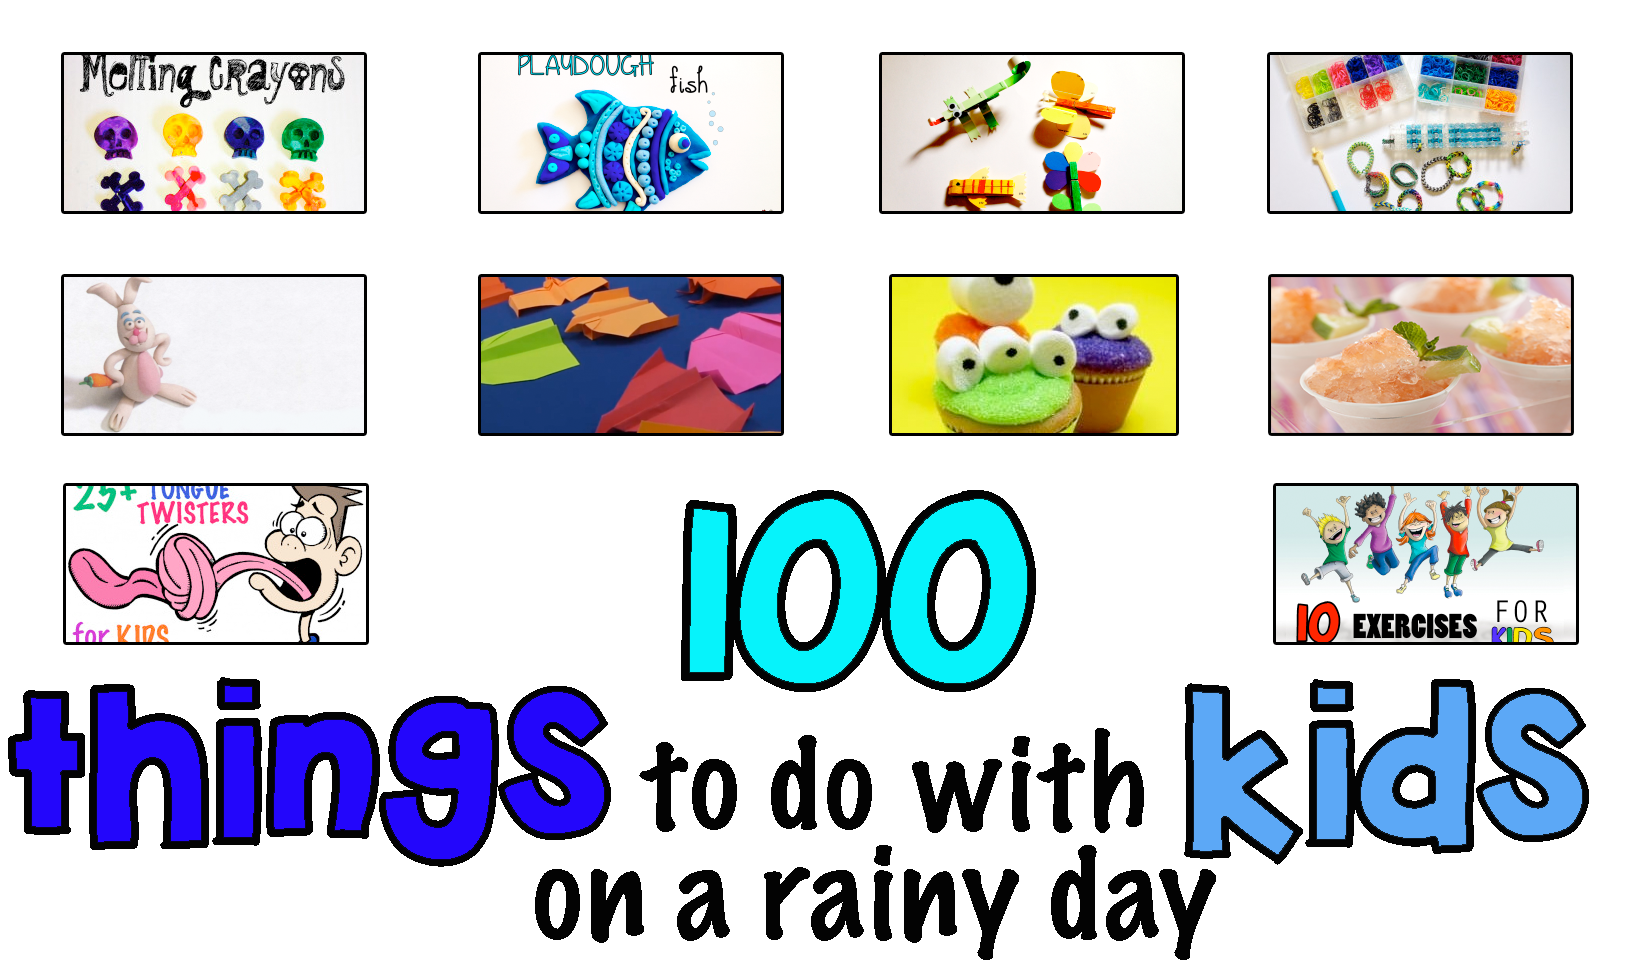 100 things to do with kids